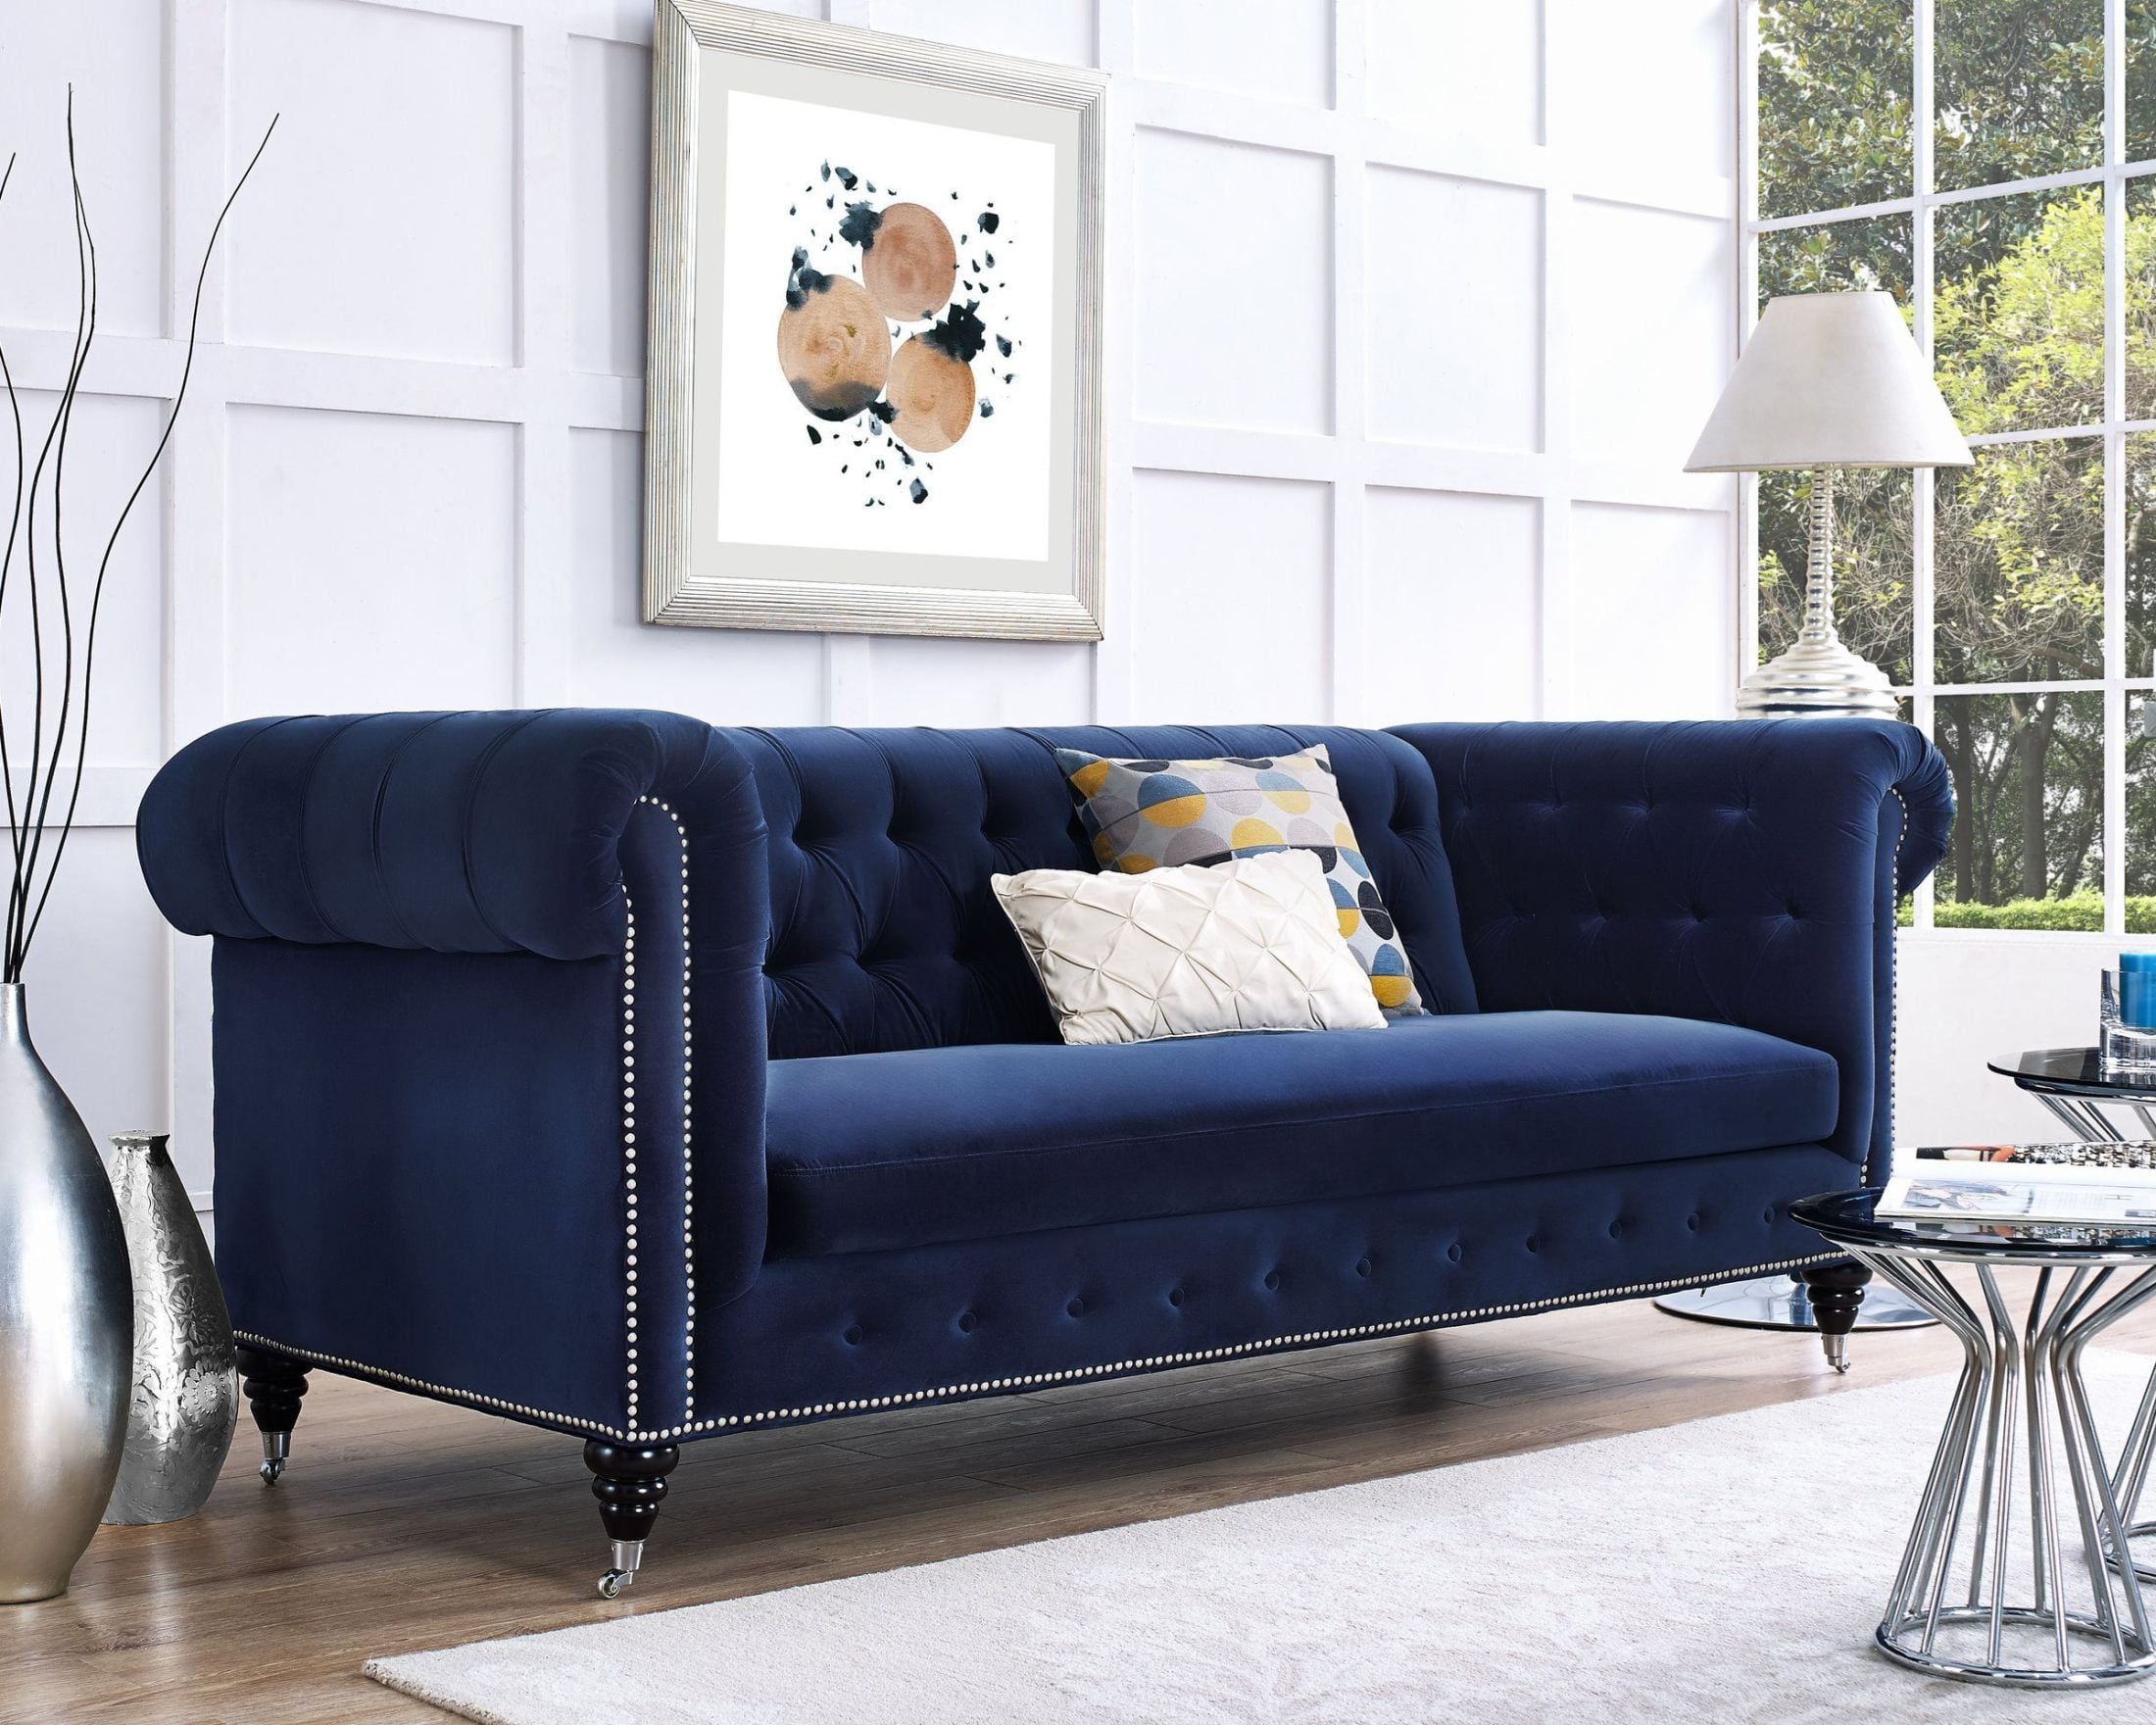 Hanny Navy Blue Velvet Sofa From Tov | Coleman Furniture For Sofas In Blue (View 13 of 20)